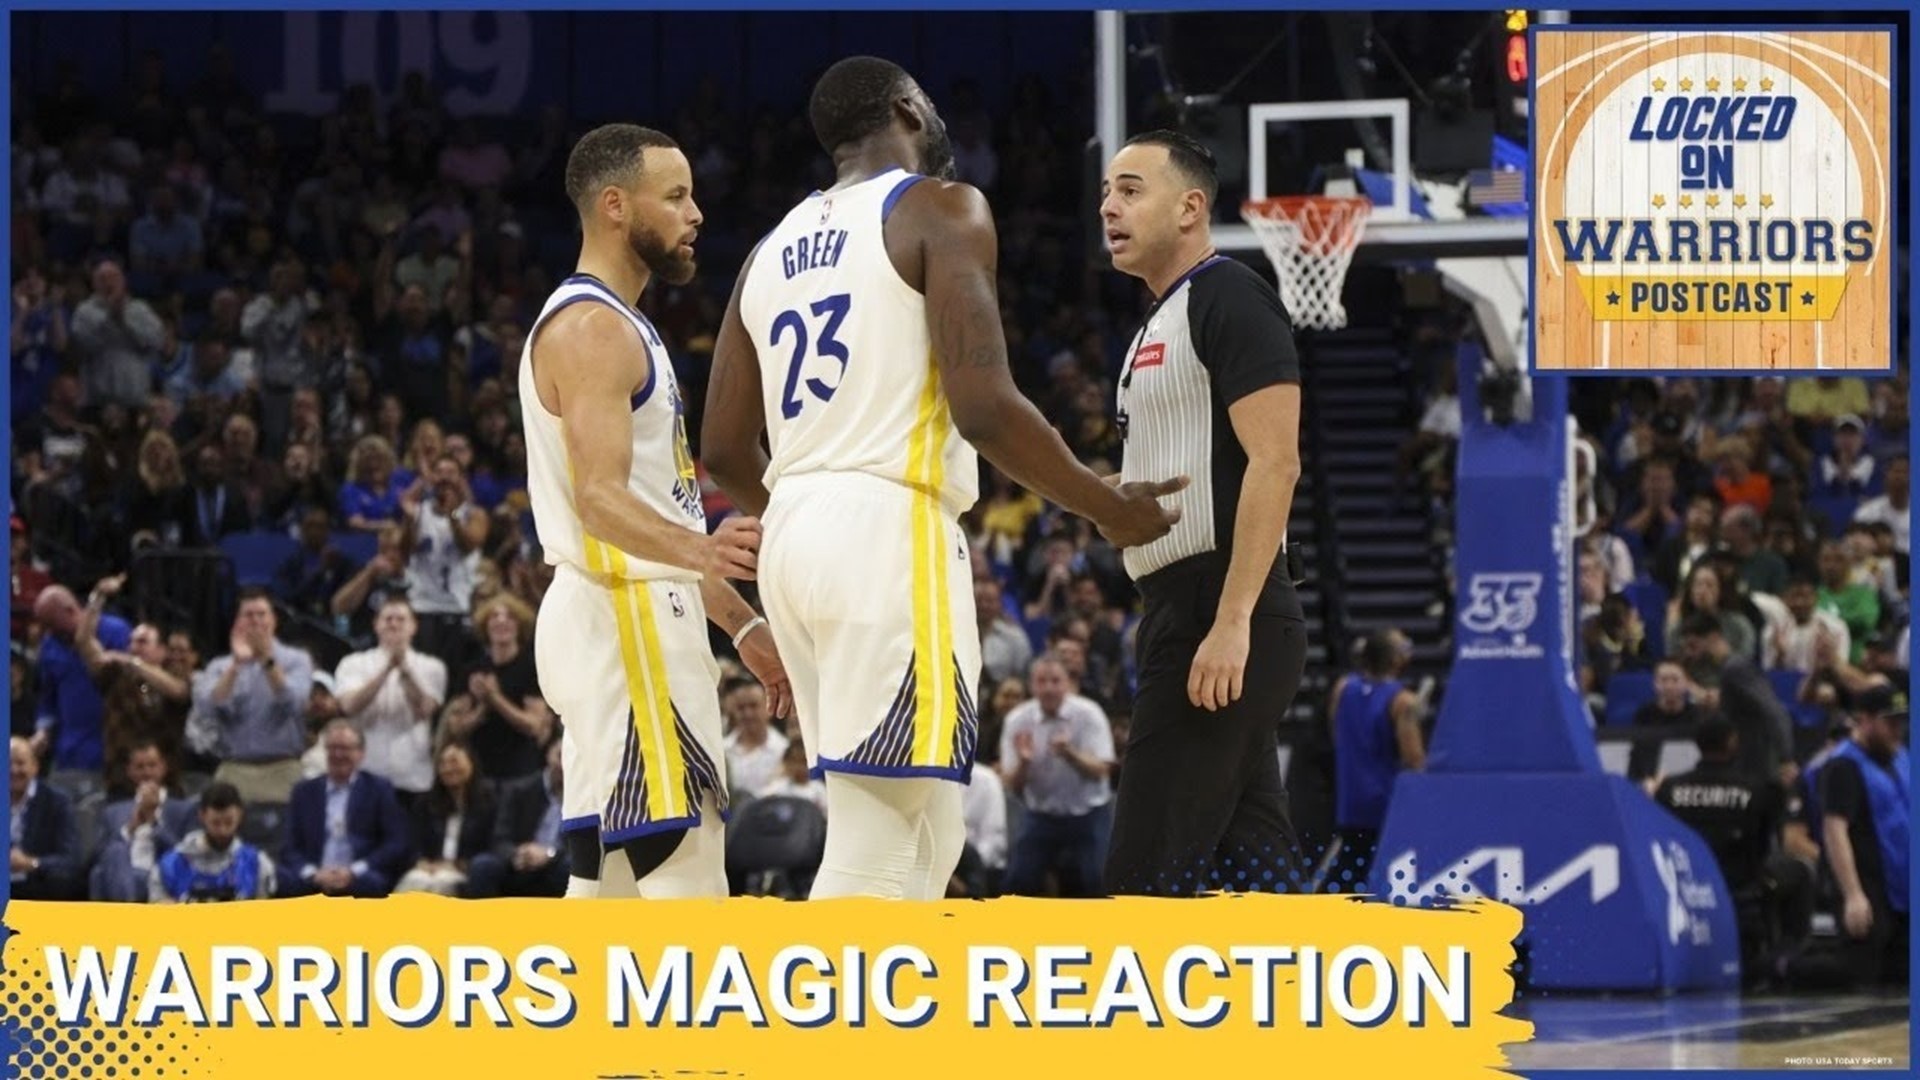 The Golden State Warriors gutted out an impressive road with over the Orland Magic 101-93, despite missing Jonathan Kuminga, who was out with knee soreness.